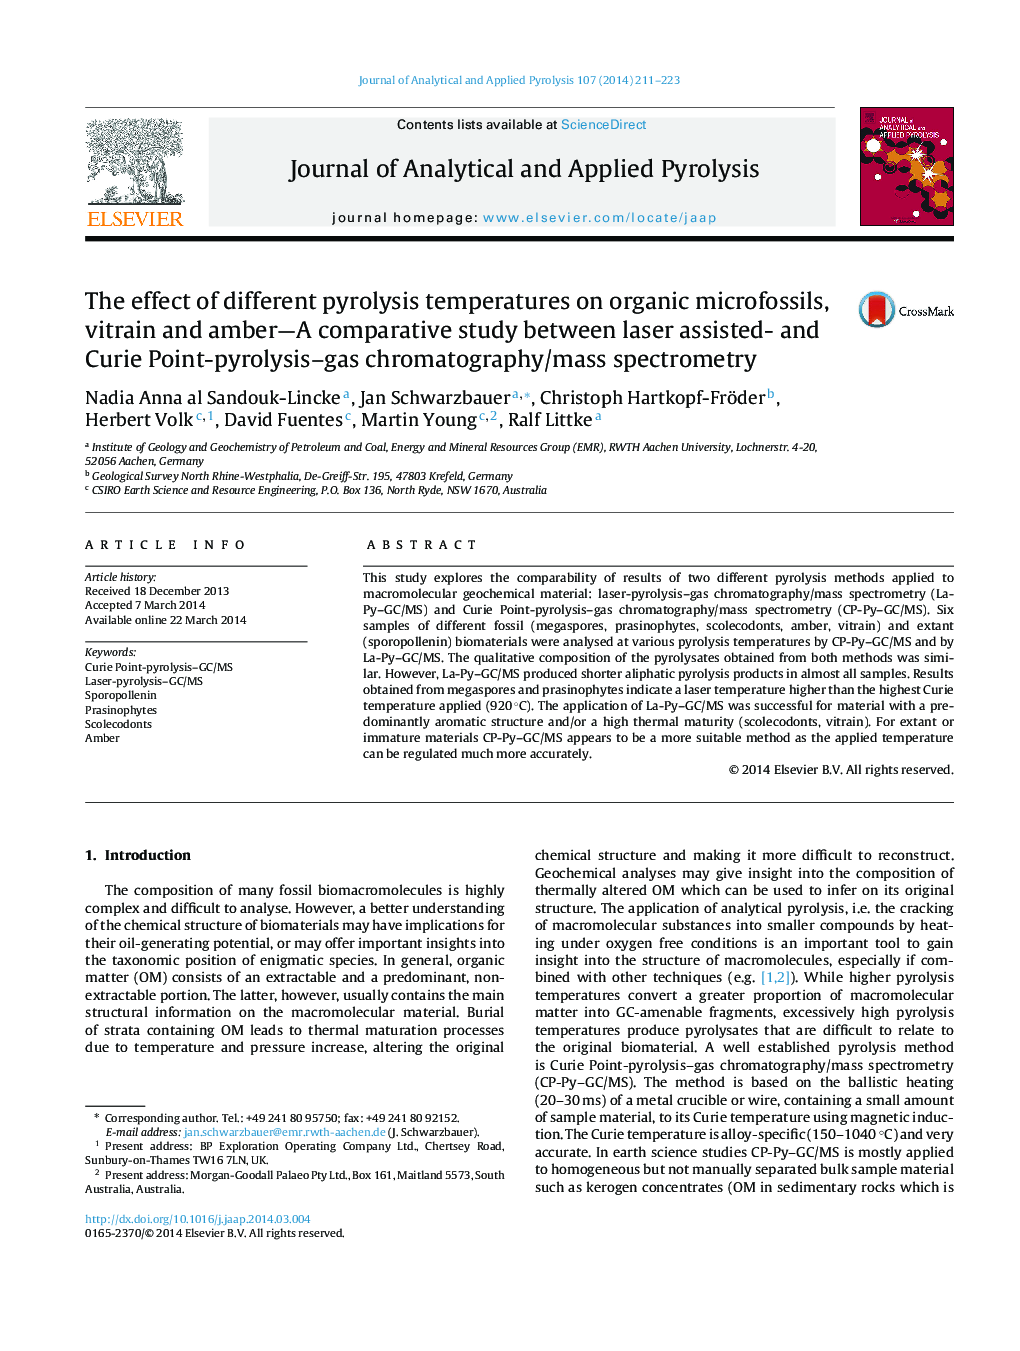 The effect of different pyrolysis temperatures on organic microfossils, vitrain and amber—A comparative study between laser assisted- and Curie Point-pyrolysis–gas chromatography/mass spectrometry